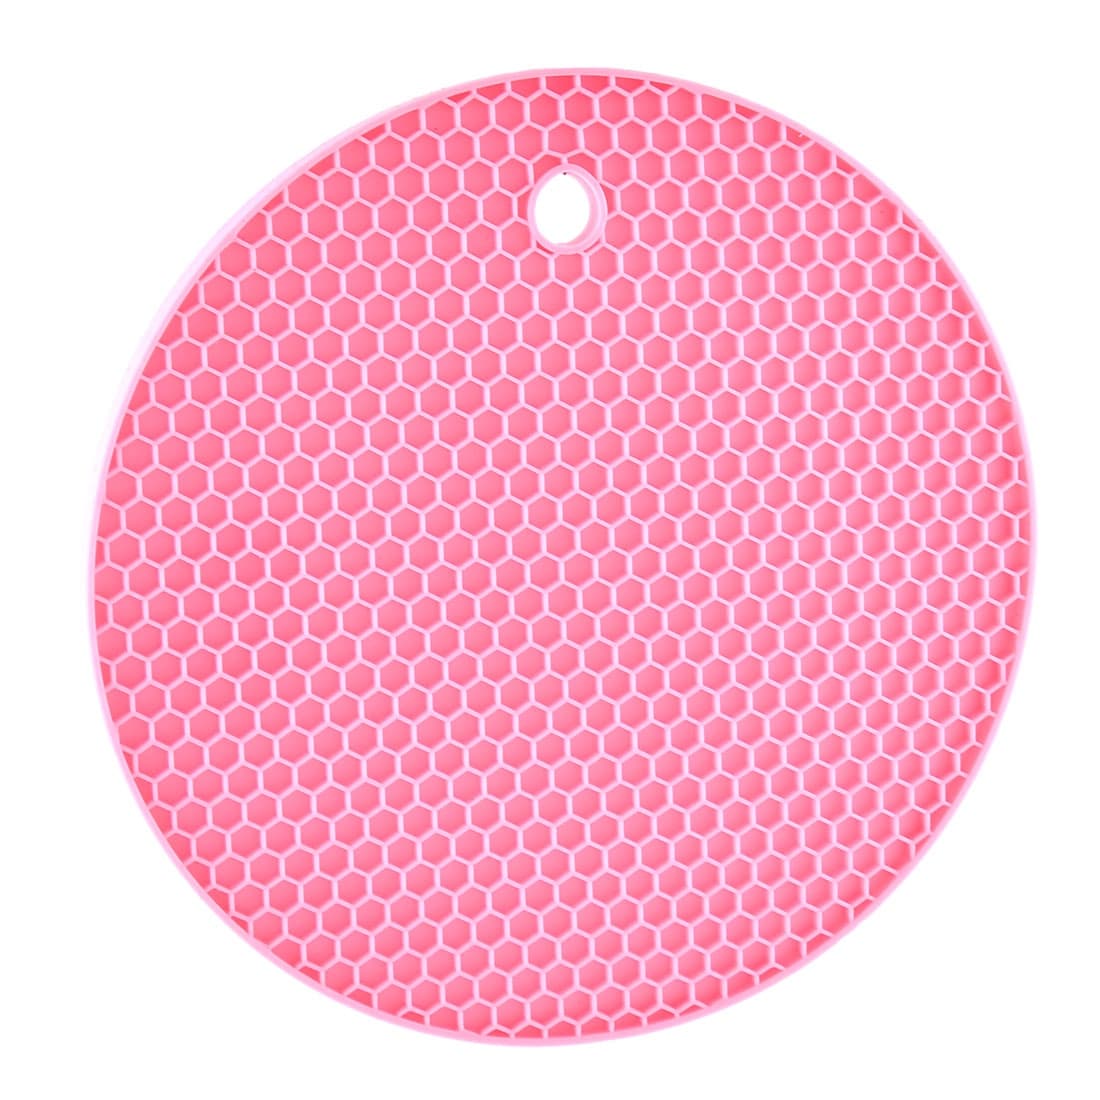 https://ak1.ostkcdn.com/images/products/is/images/direct/931a19e5b579f4ce2c7bc19f953d17c4f1146399/Rubber-Kitchen-Round-Shaped-Nonslip-Heat-Resistant-Pot-Mat-Pad-Holder.jpg